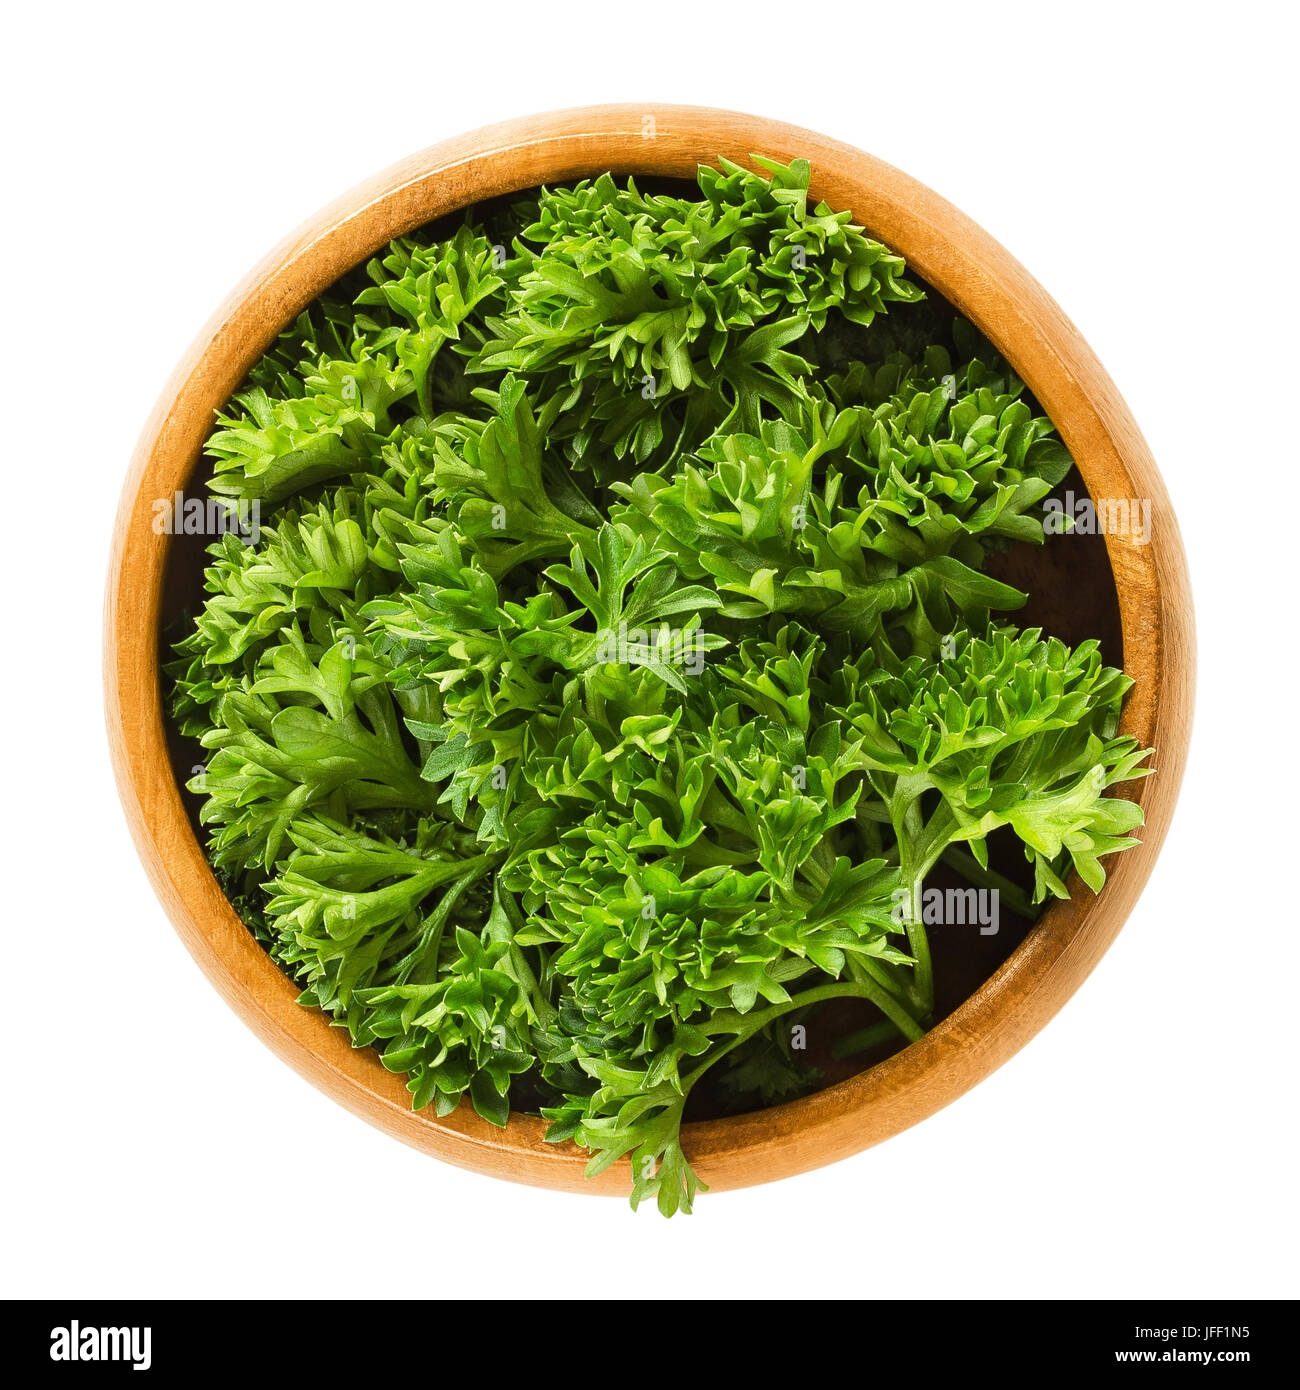 Fresh curly parsley leaves in wooden bowl. Green leaves of Petroselinum crispum, used as herb, spice and vegetable. Isolated macro food photo close up Stock Photo